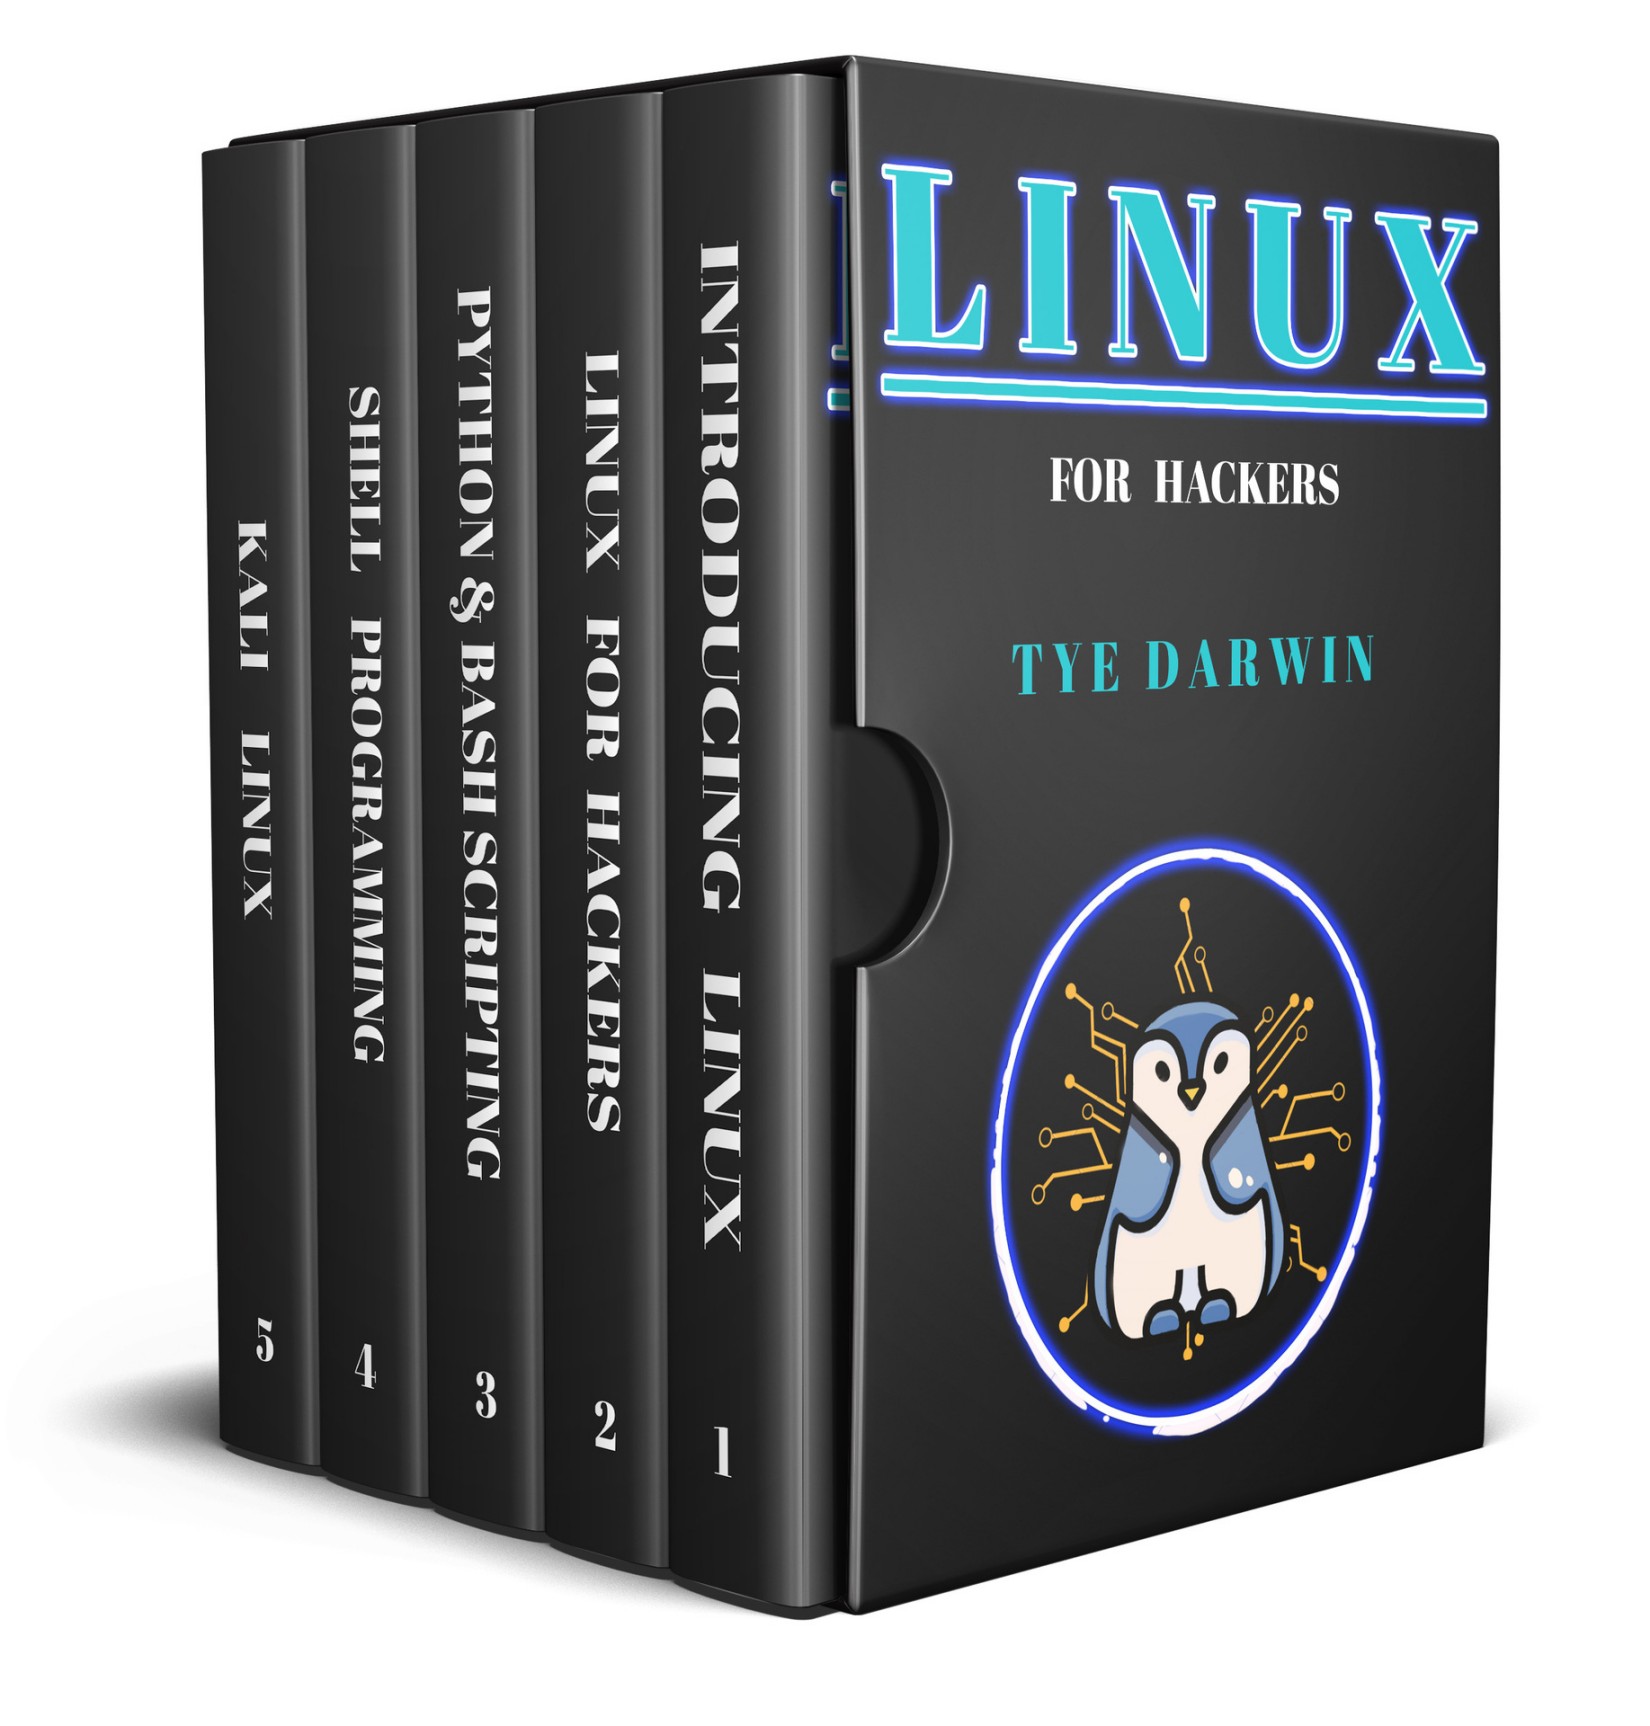 Linux for Hackers: Learn Cybersecurity Principles with Shell,Python,Bash Programming using Kali Linux Tools. A Complete Guide for Beginners